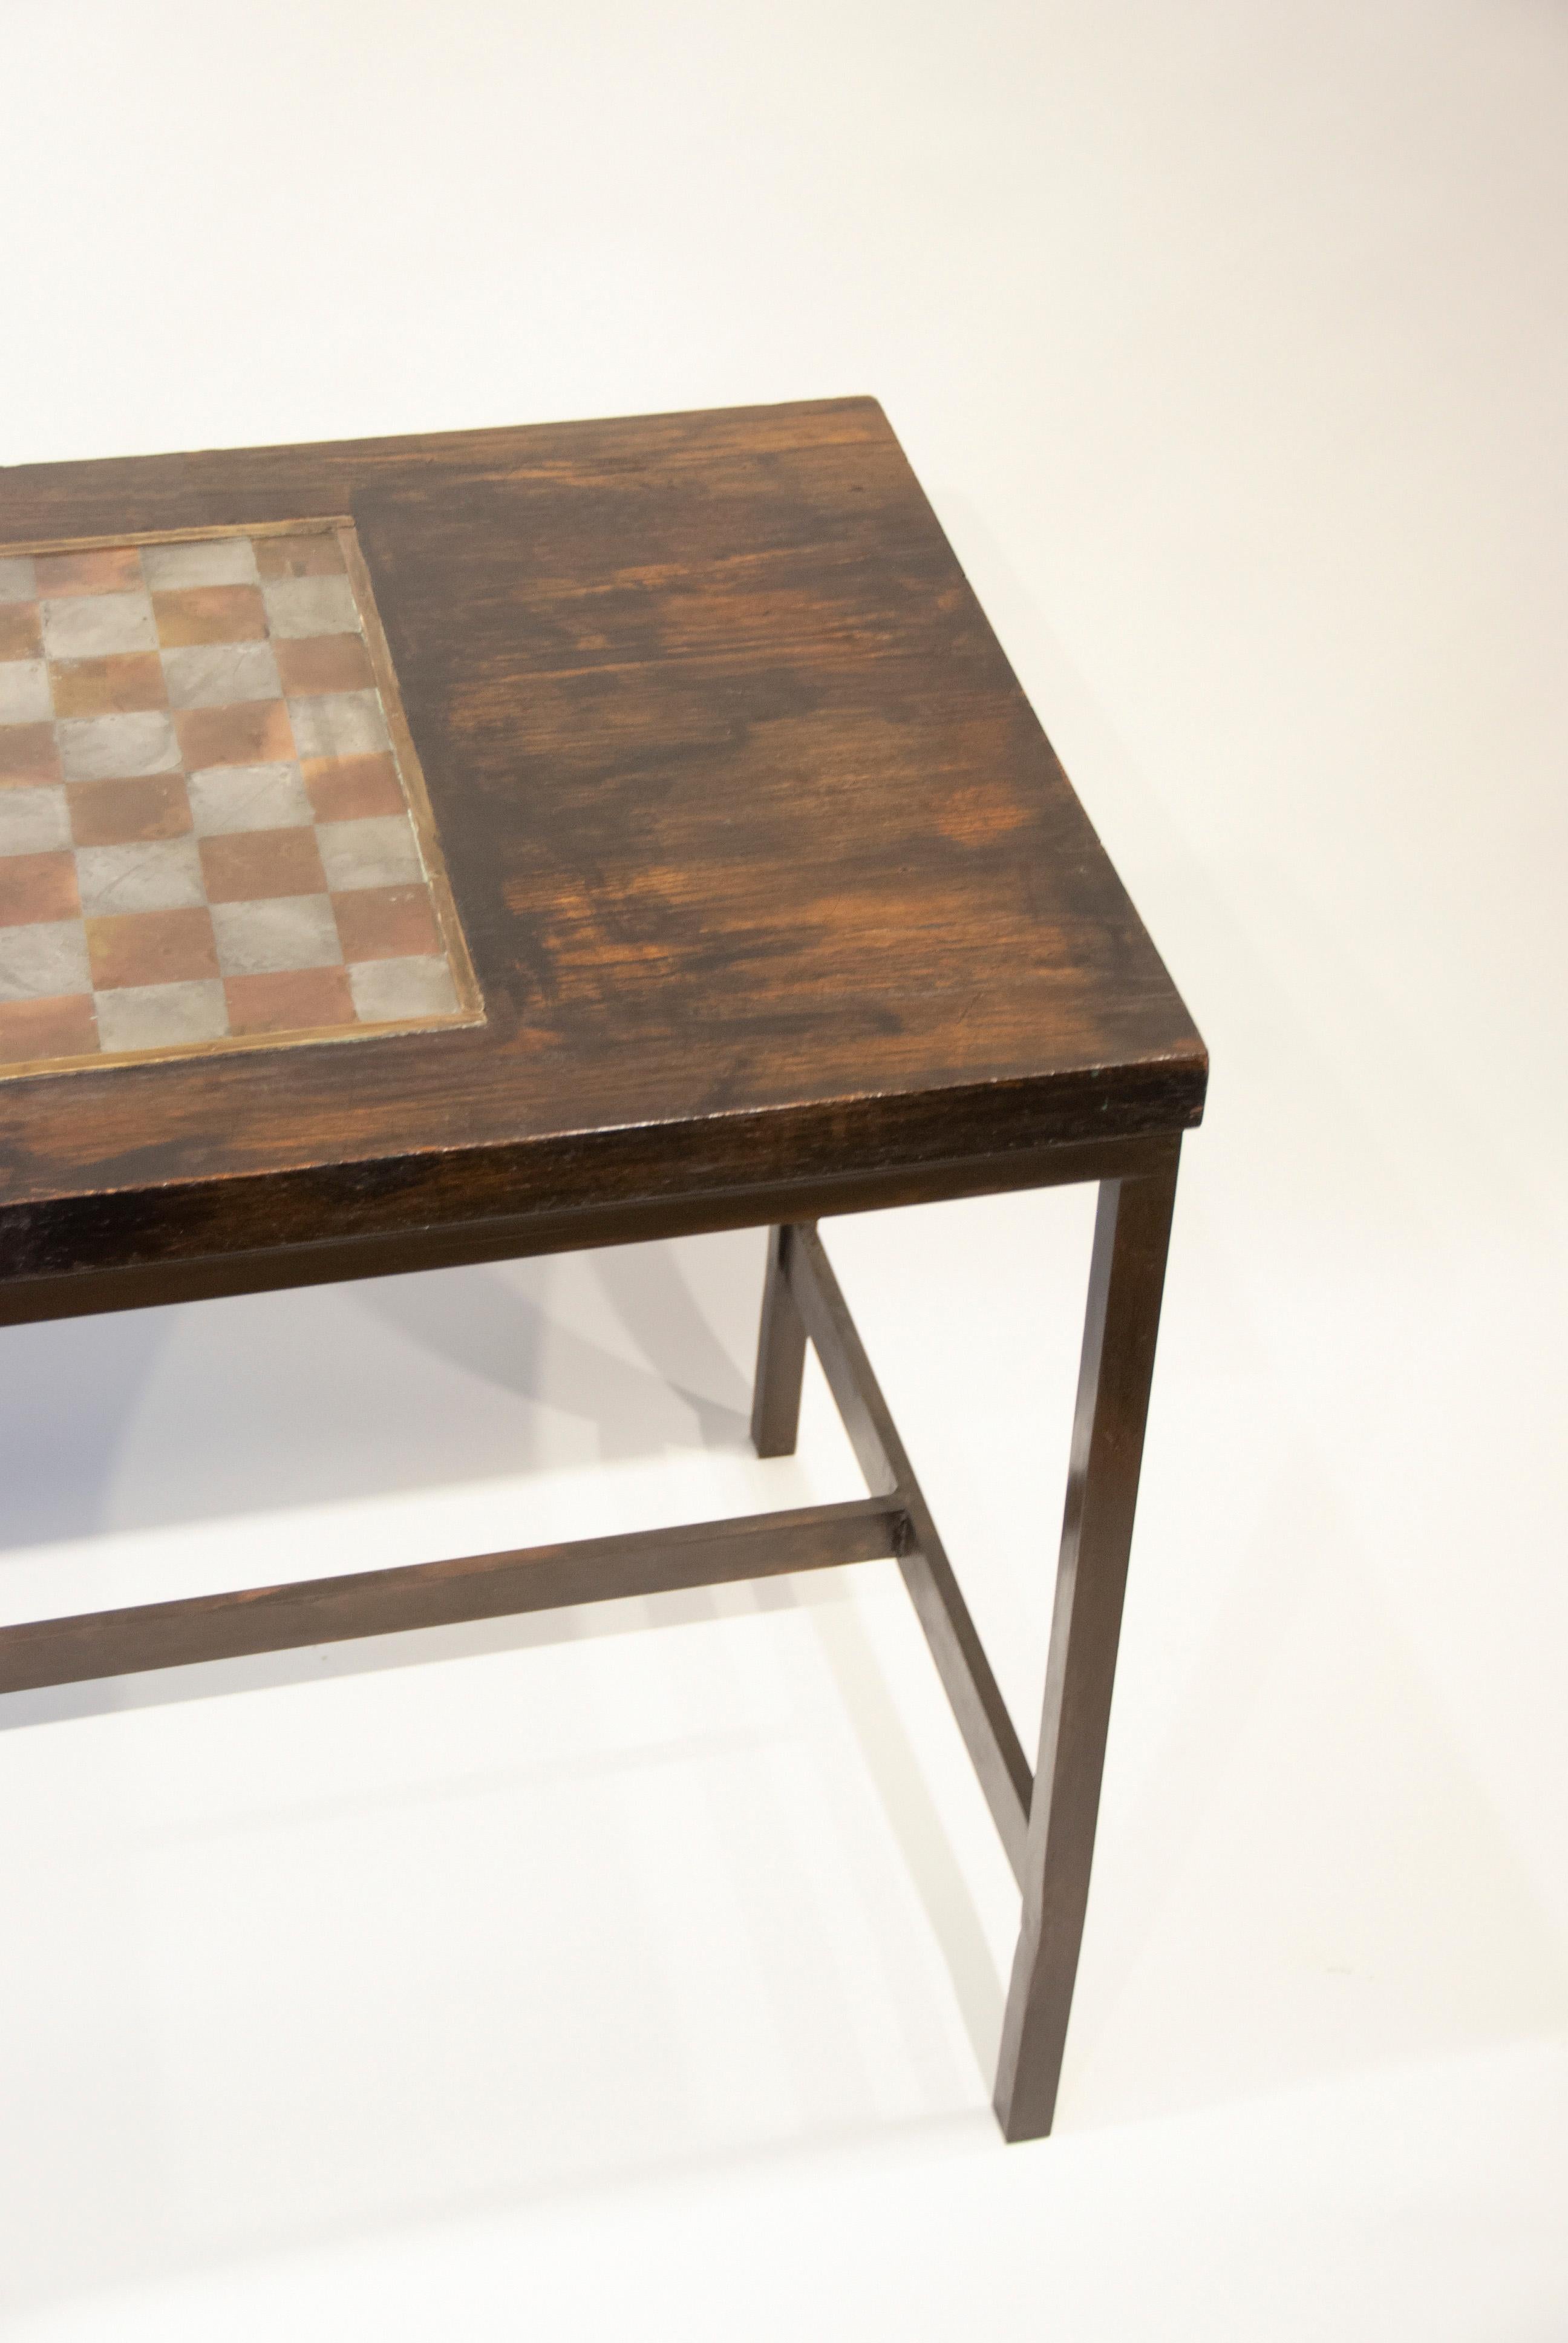 Philip and Kelvin LaVerne

Game table

Wood, pewter and bronze, circa 1970s
Measures: 28 1/2” H x 38” W x 22” D
(72.39cm x 97cm x 55.88cm)

Philip and Kelvin LaVerne are an American collaborative-design father and son duo. They are best